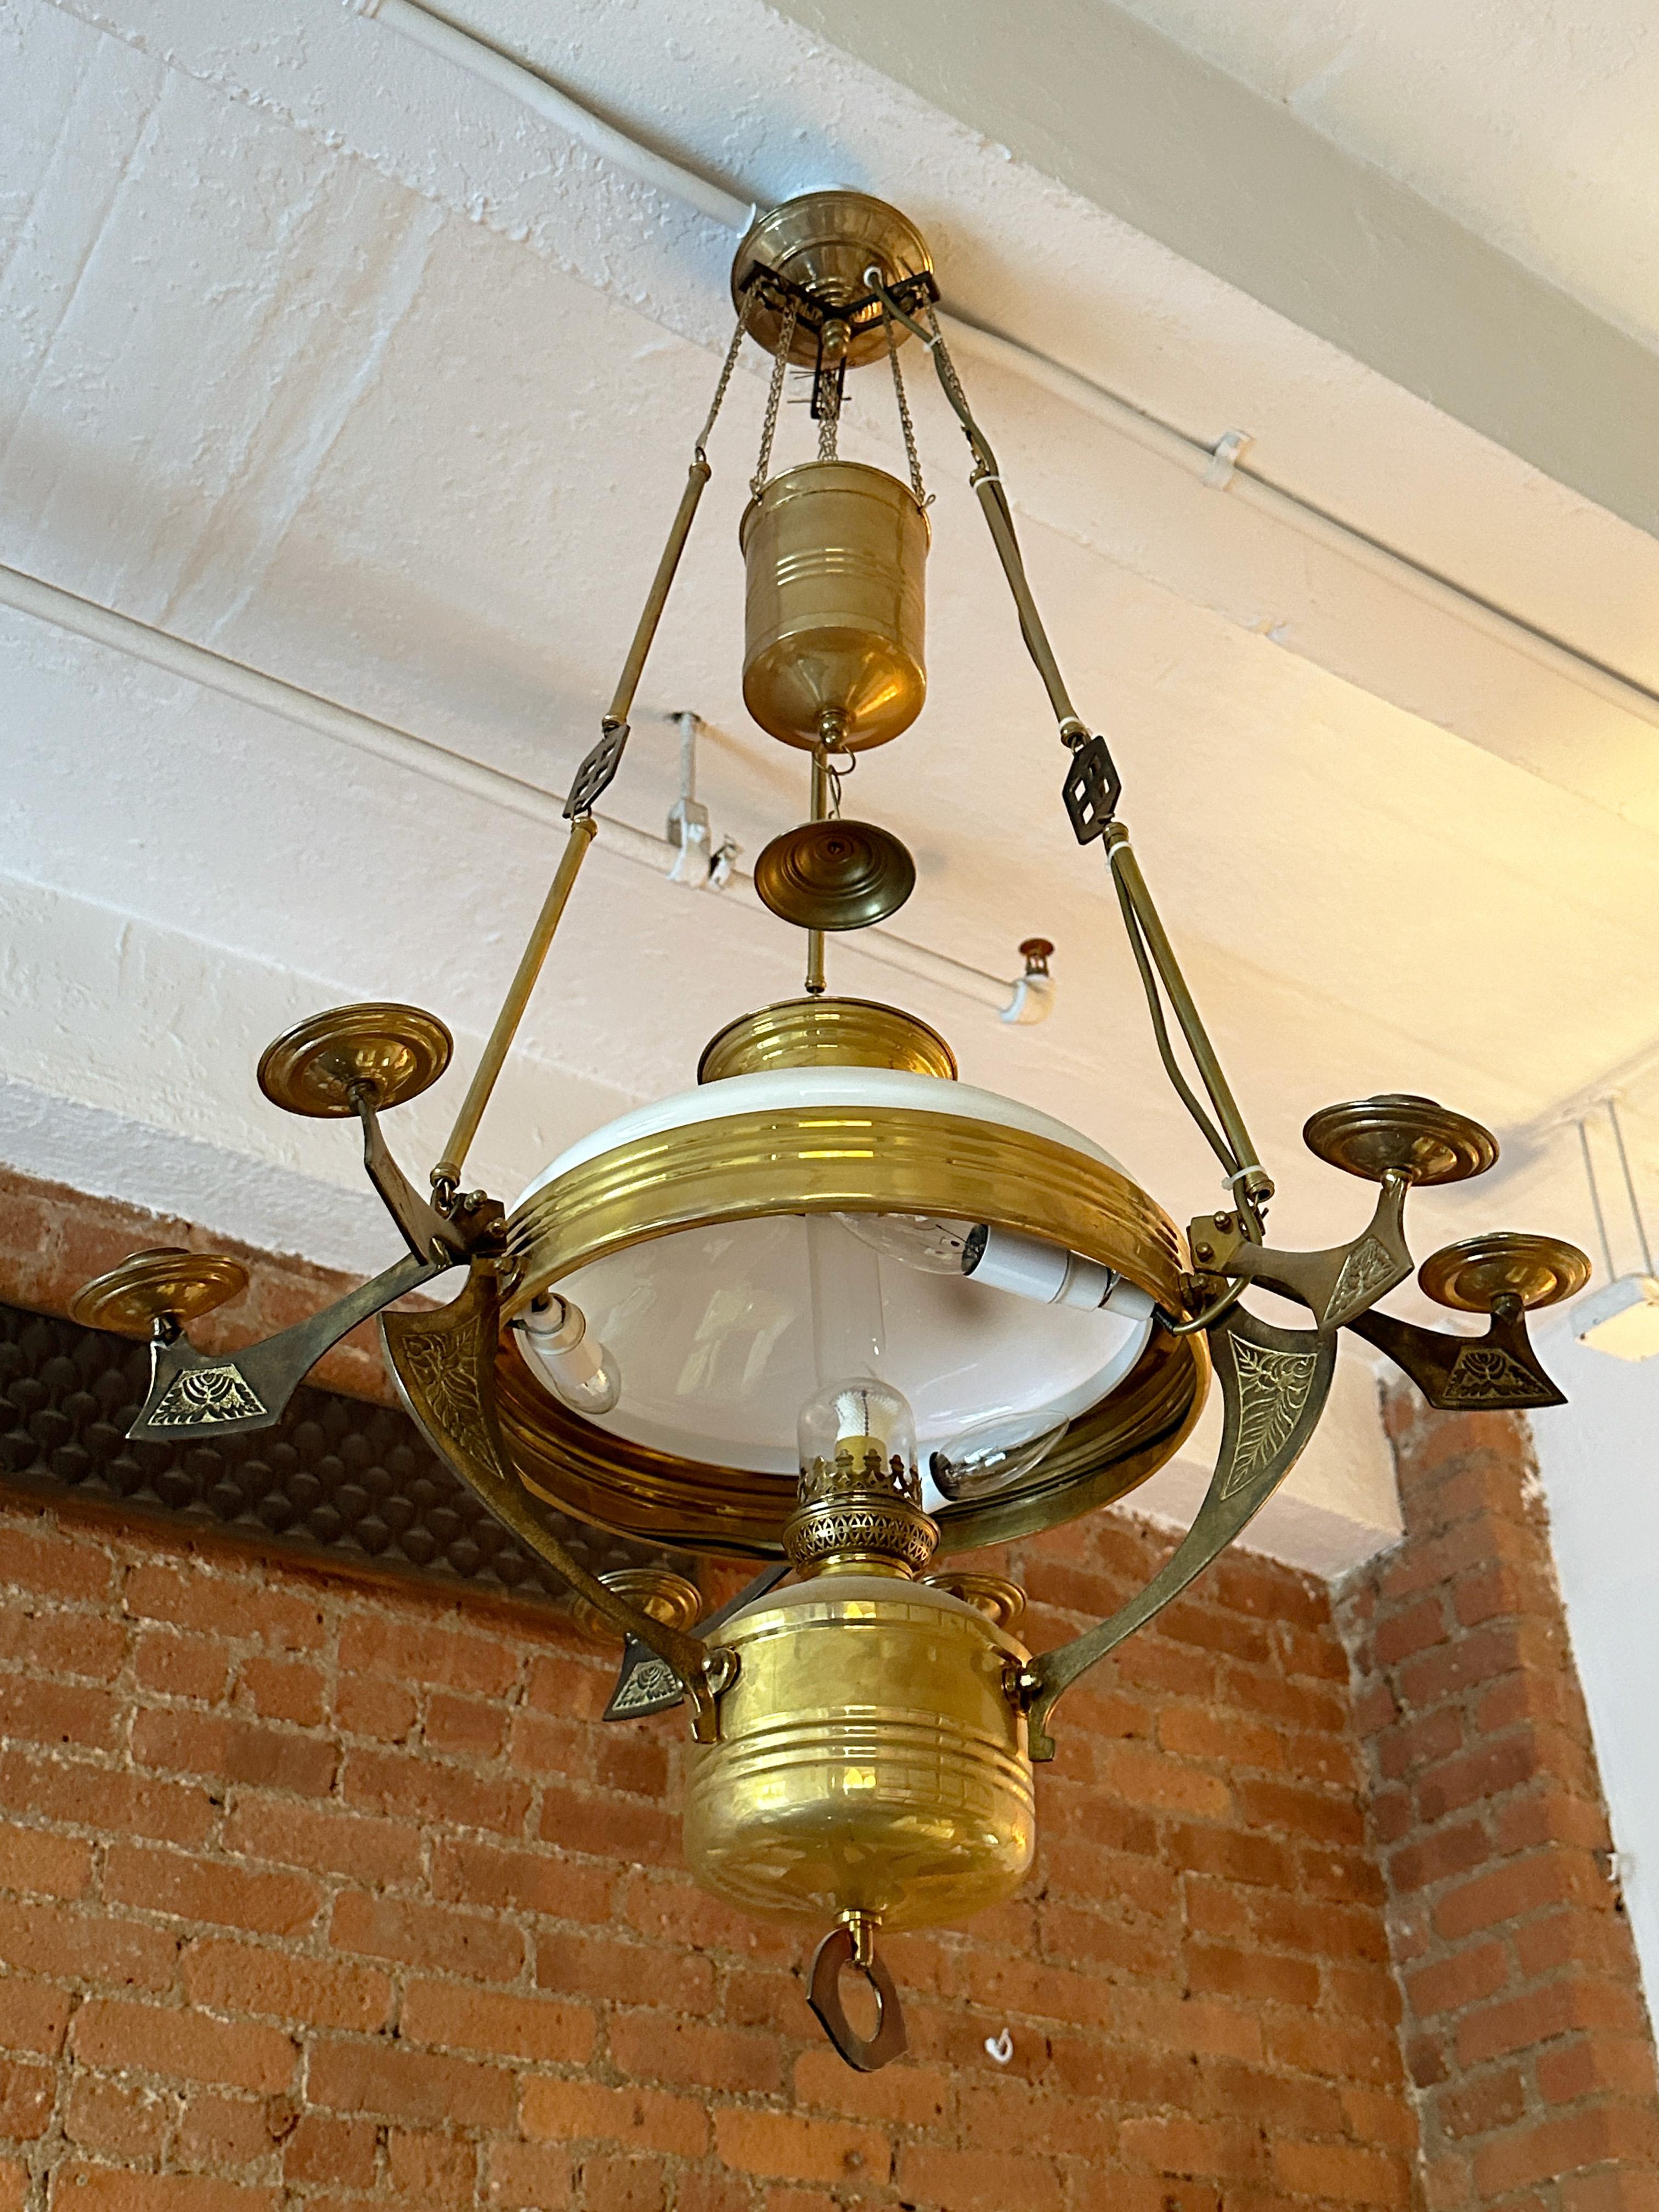 Early 19th century Sweedish chandelier reproduction. Beautifu pendant made of brass and white glass. Wired in working conditions. 

Property from esteemed interior designer Juan Montoya. Juan Montoya is one of the most acclaimed and prolific